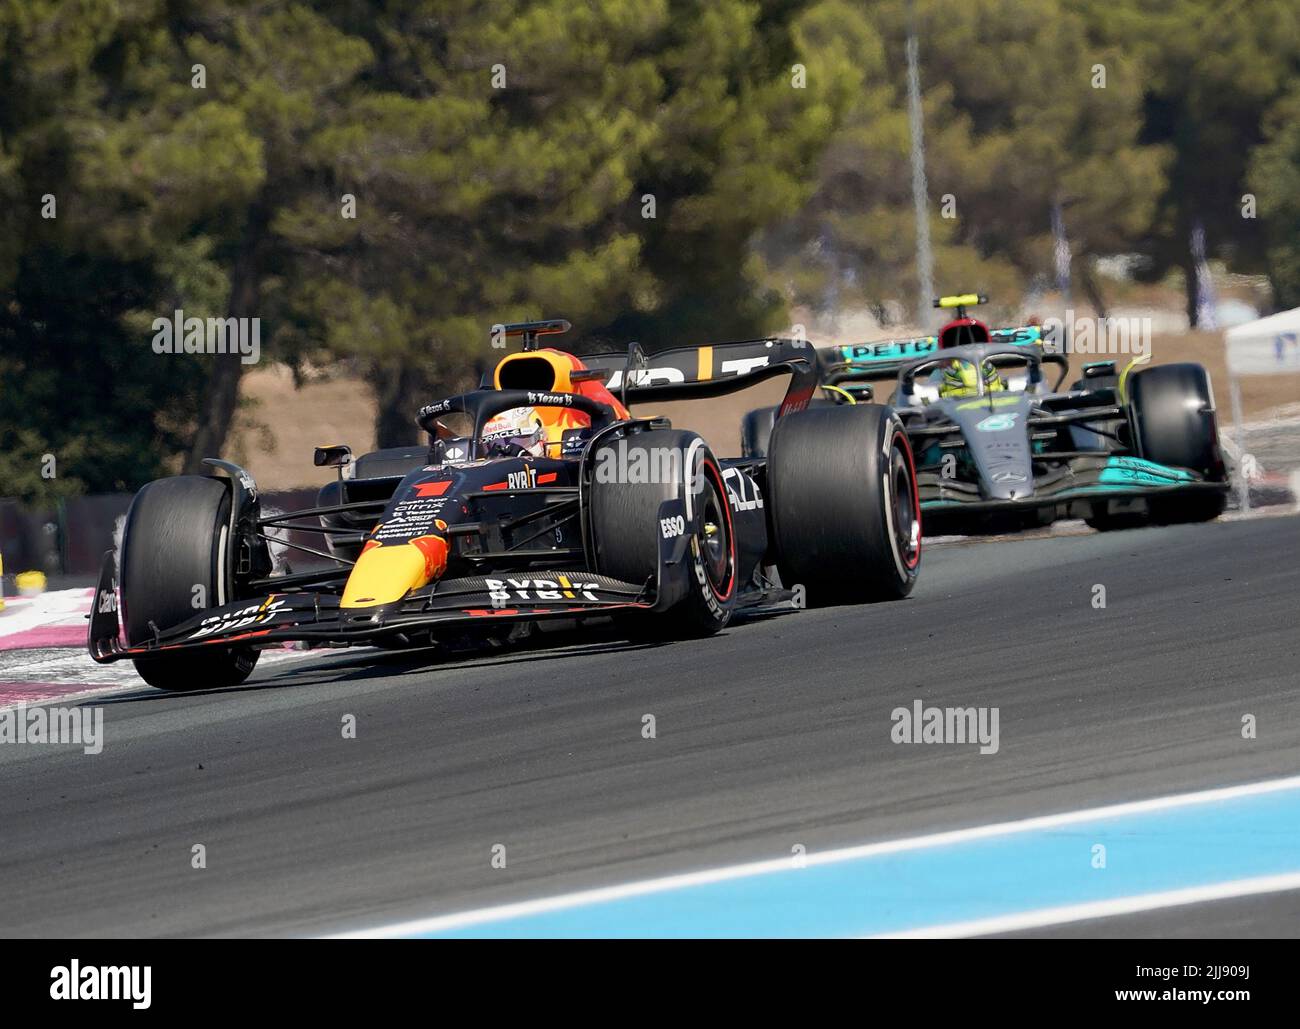 24 July 2022, France, Le Castellet: Motorsport: Formula 1 World Championship, French Grand Prix, race: Max Verstappen (l) from the Netherlands of Team Oracle Red Bull drives ahead of Lewis Hamilton from Great Britain of Team Mercedes. Photo: Hasan Bratic/dpa Stock Photo